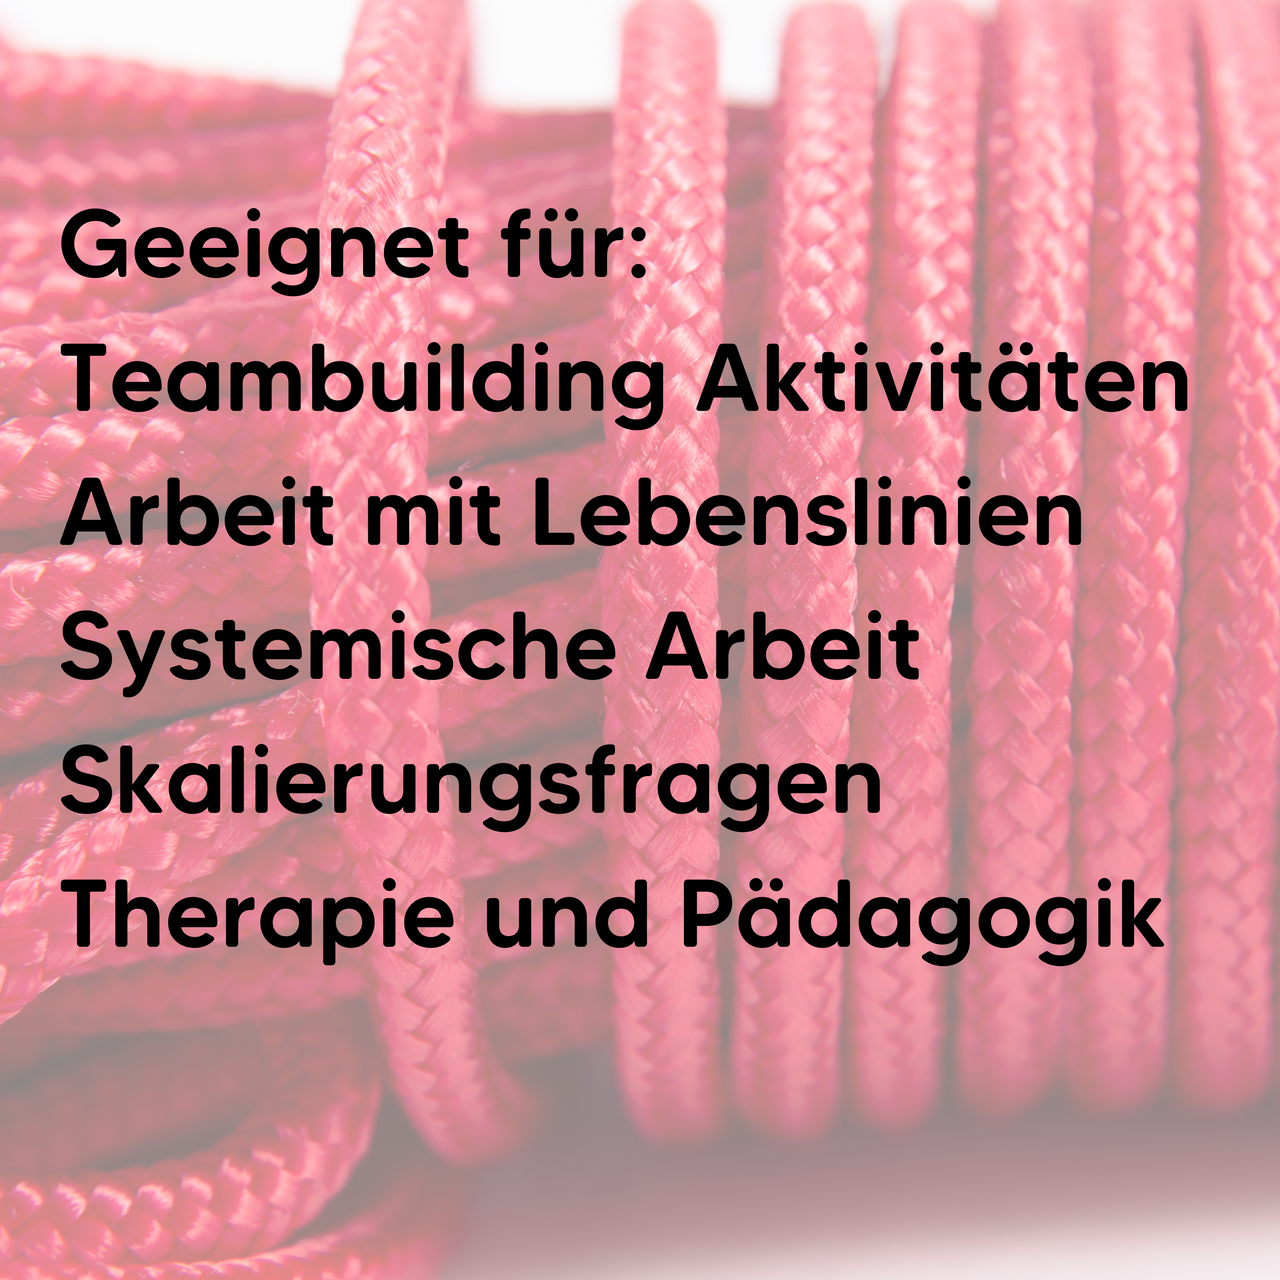 Rope - Therapy Rope - "Red Thread" 25m